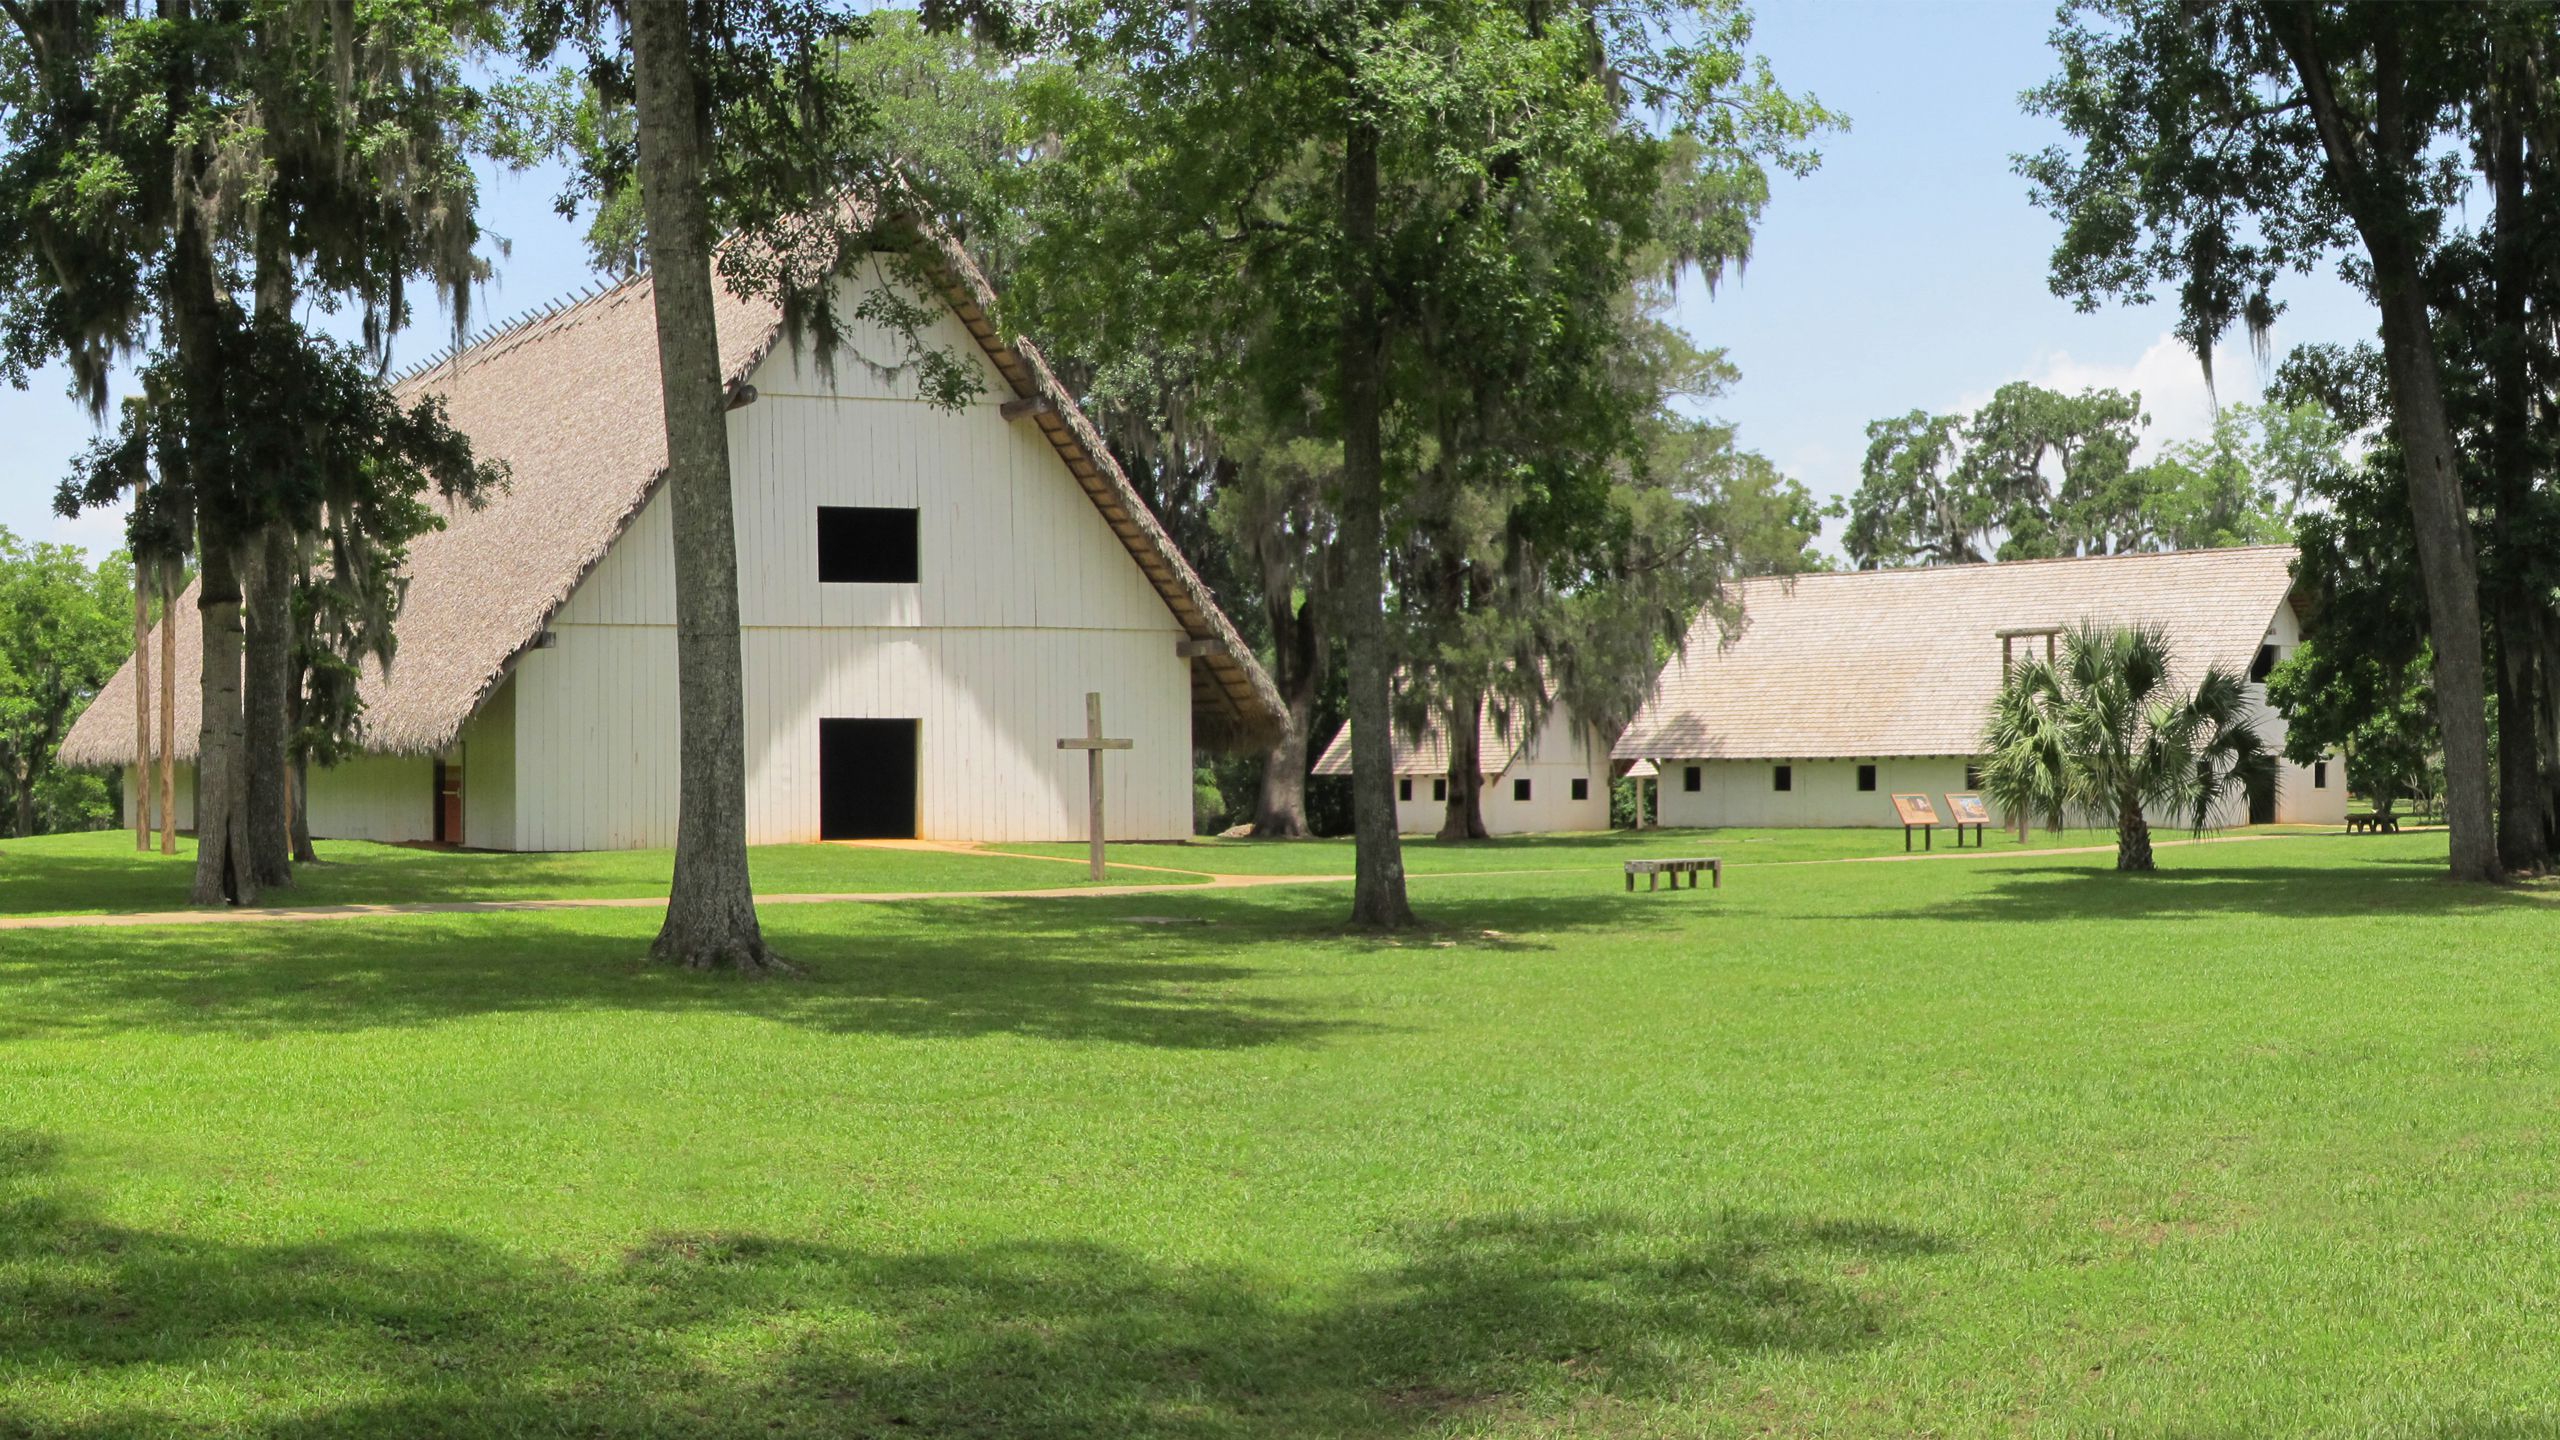 <p><strong>Location:</strong> Tallahassee, Florida <br><strong>Era:</strong> Early 1700s <br><strong>What to do:</strong> In Mission San Luis, the Apalachee tribe and Spanish settlers lived together, and <a href="https://www.missionsanluis.org/">this open-air museum</a> allows visitors to explore both aspects of the village. Highlights include an Apalachee Council House, a Franciscan church, a fort, and more. <br><strong>Cost:</strong> $5 for ages 18 and up; $3 for seniors 65 and up; $2 for ages 6 to 17</p>